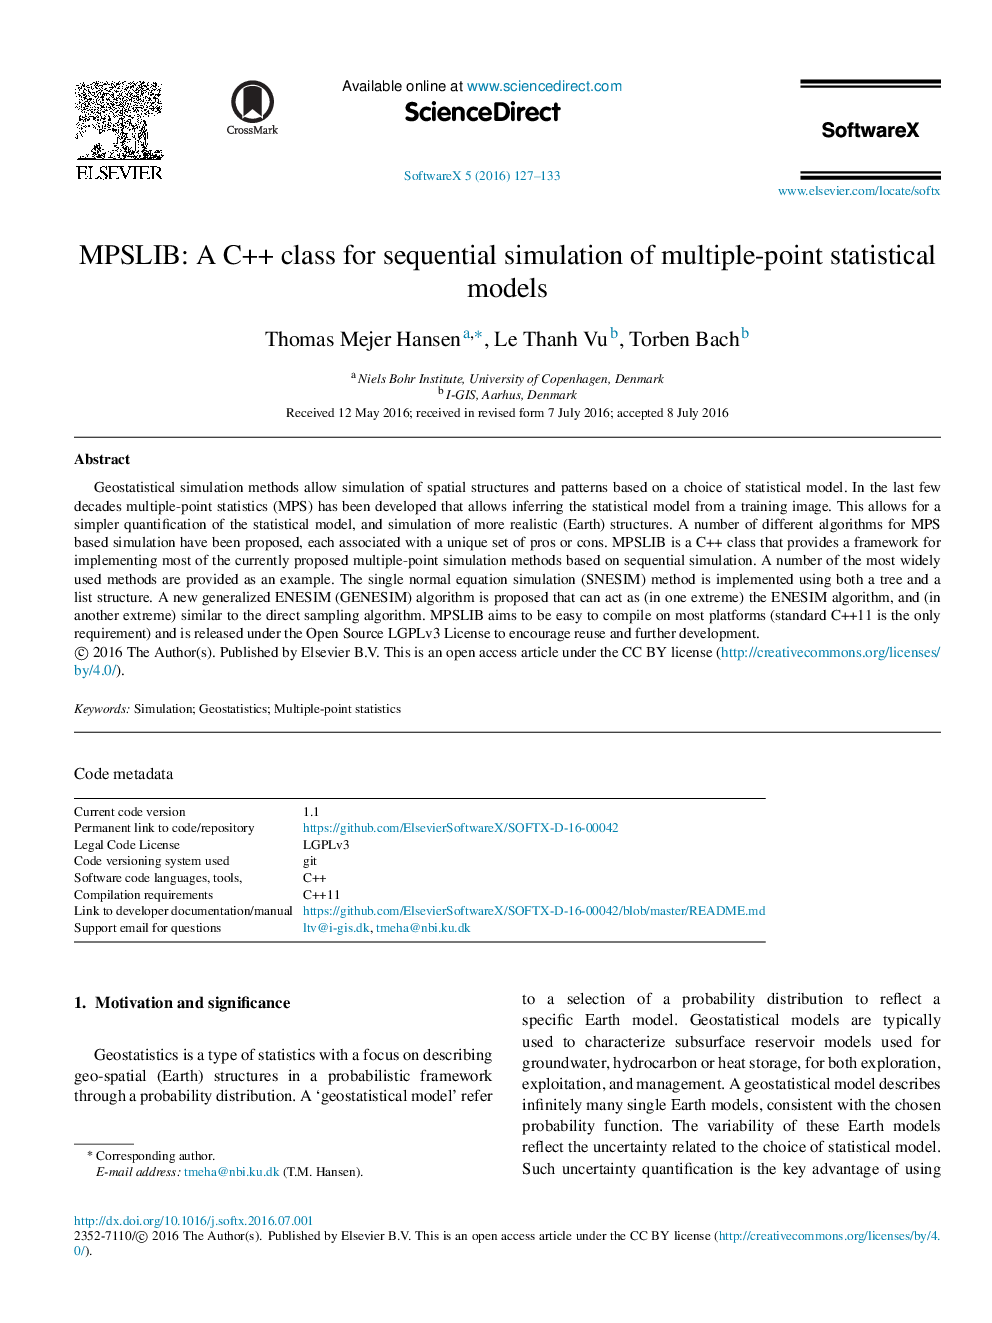 MPSLIB: A C++ class for sequential simulation of multiple-point statistical models